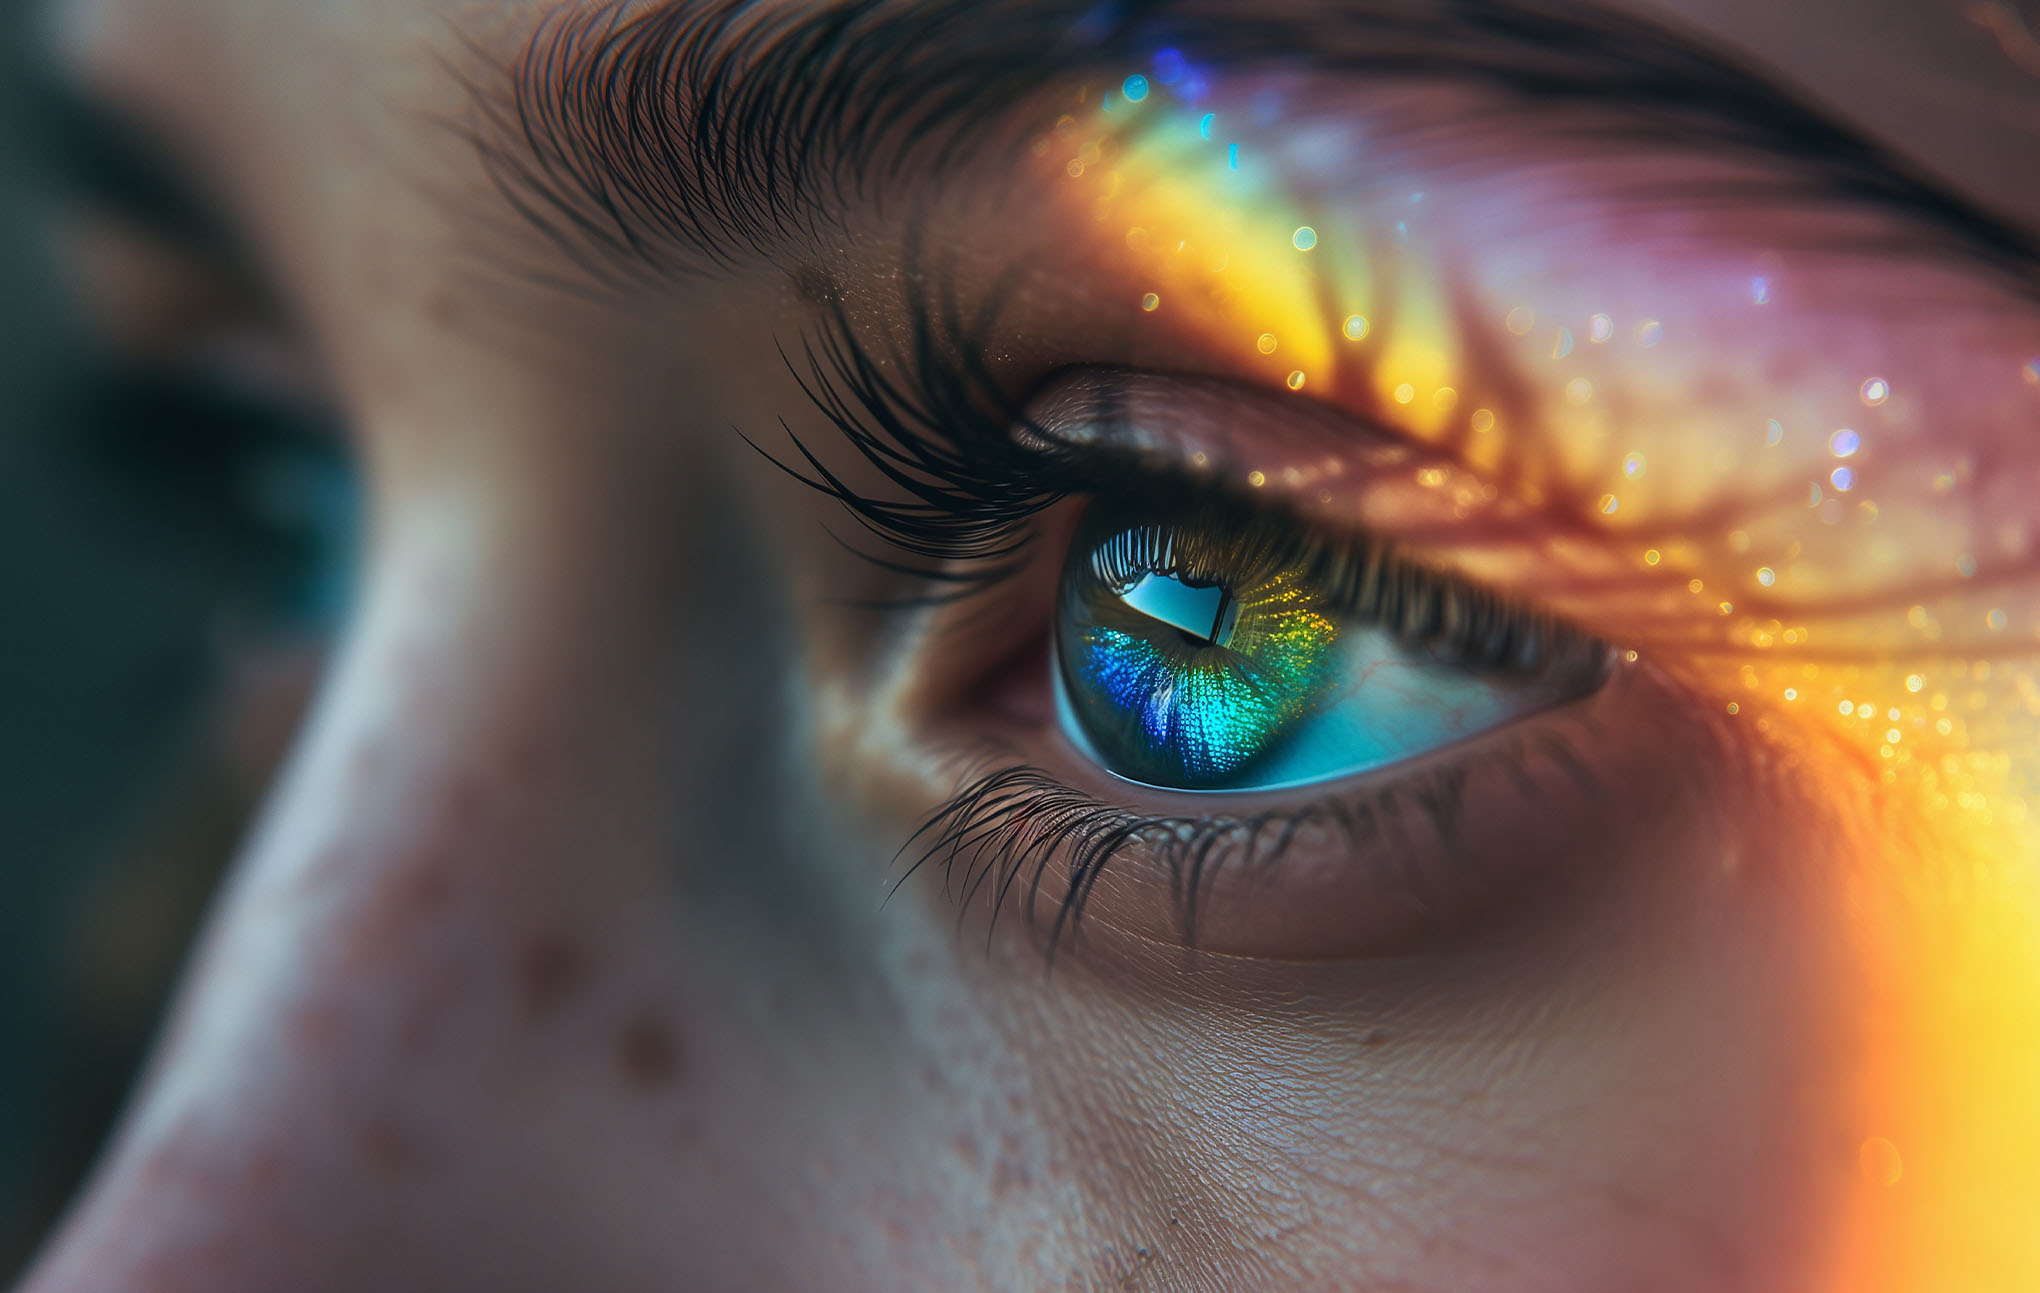 Close-up of a human eye displaying a vibrant rainbow reflection on the iris and tear duct, highlighting intricate eyelash details and skin texture.